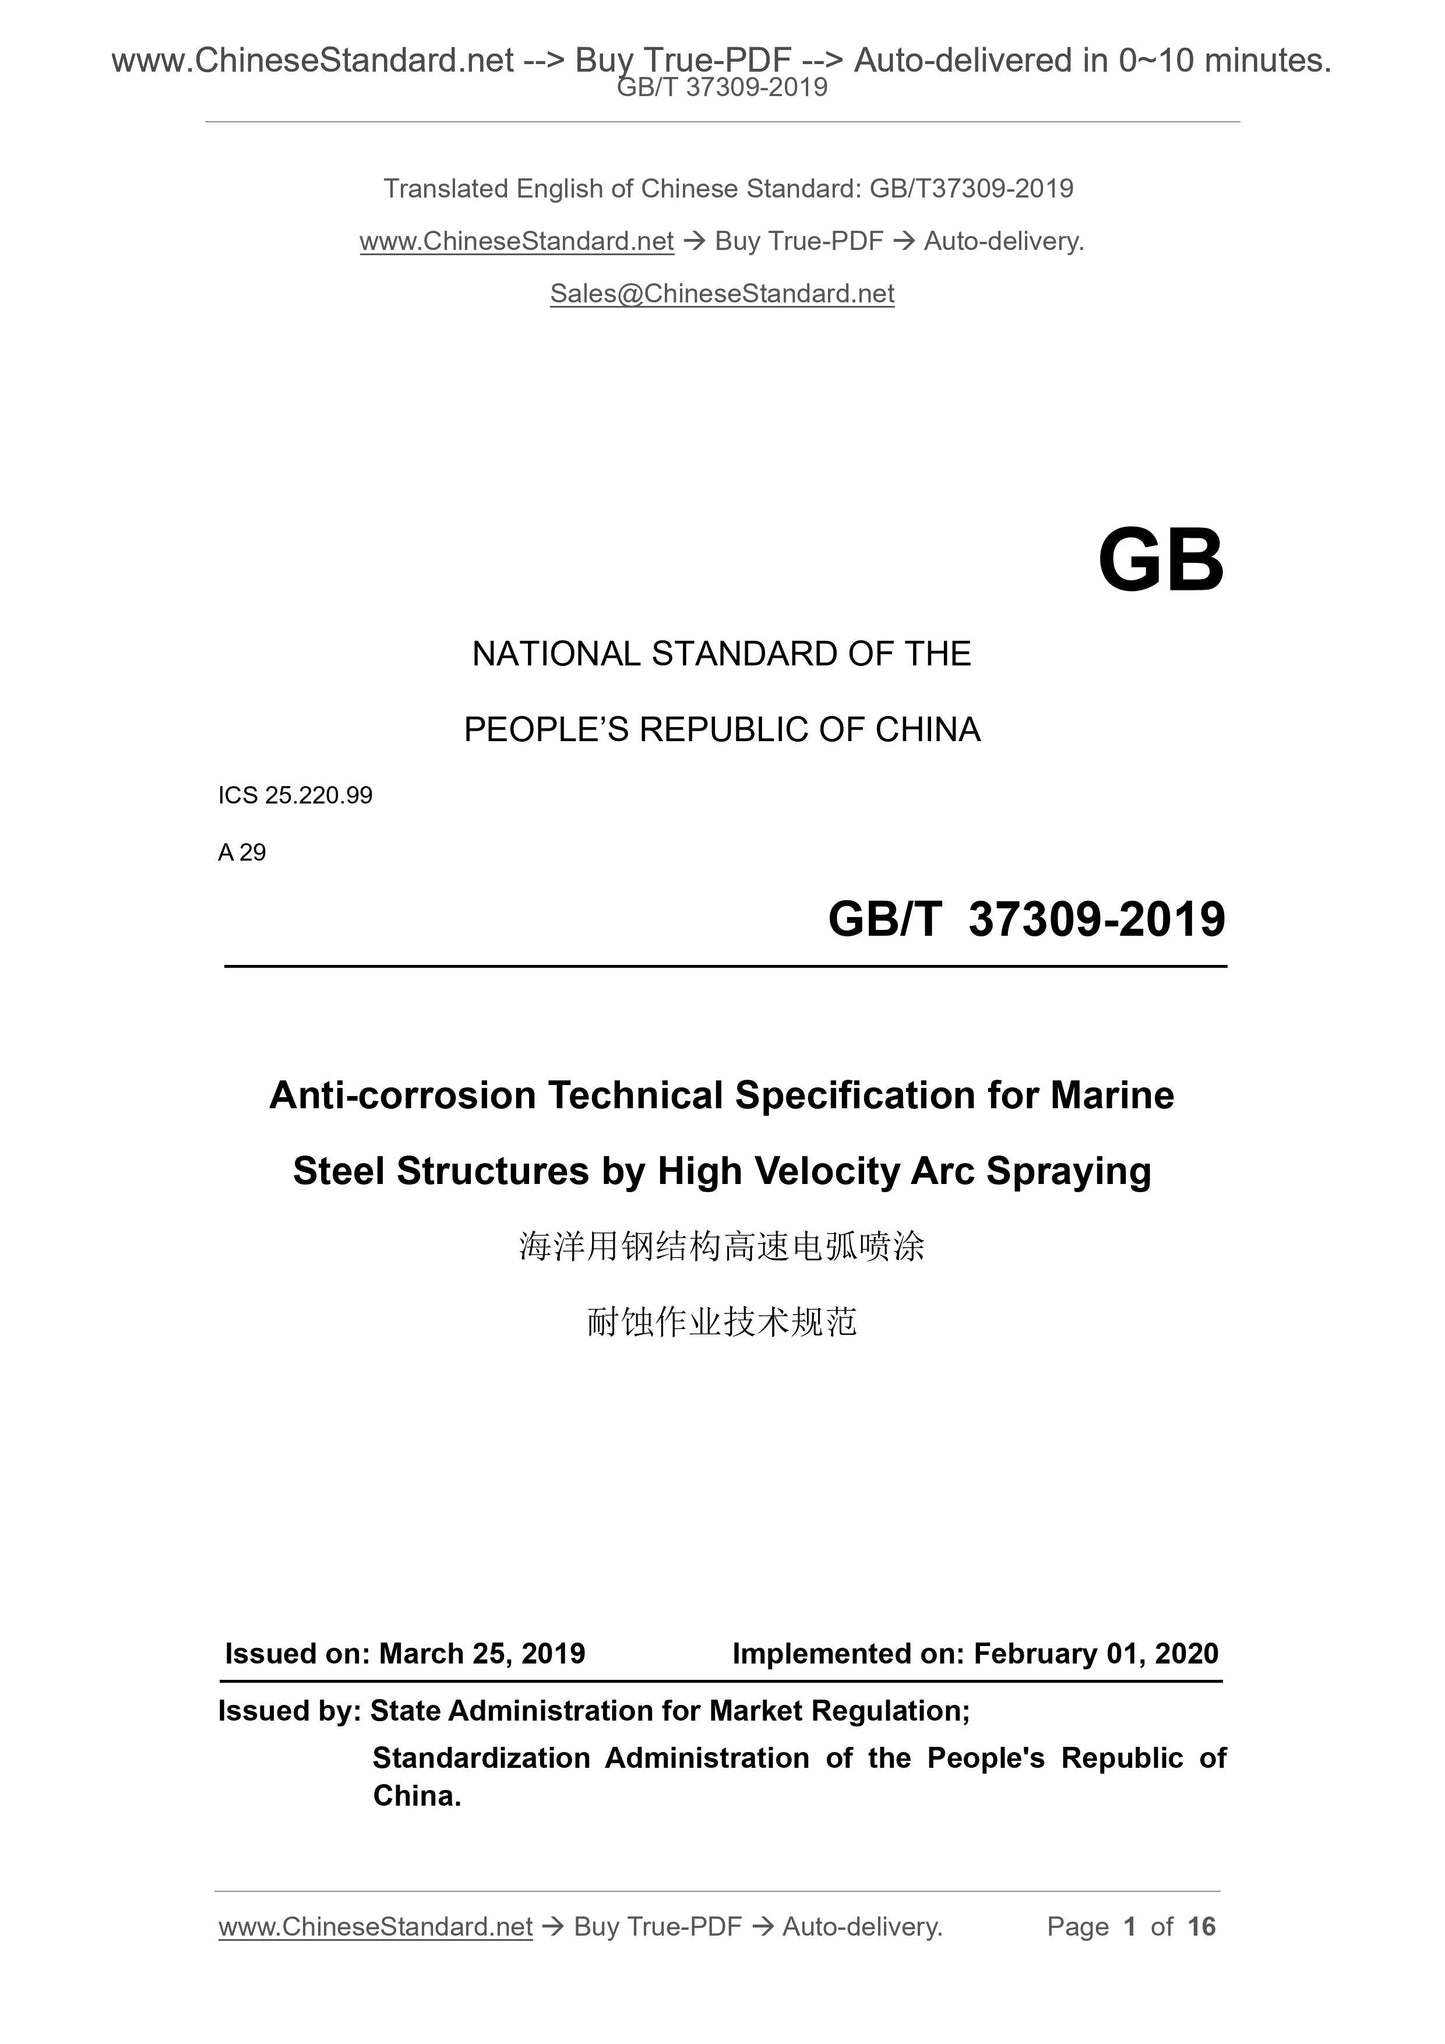 GB/T 37309-2019 Page 1